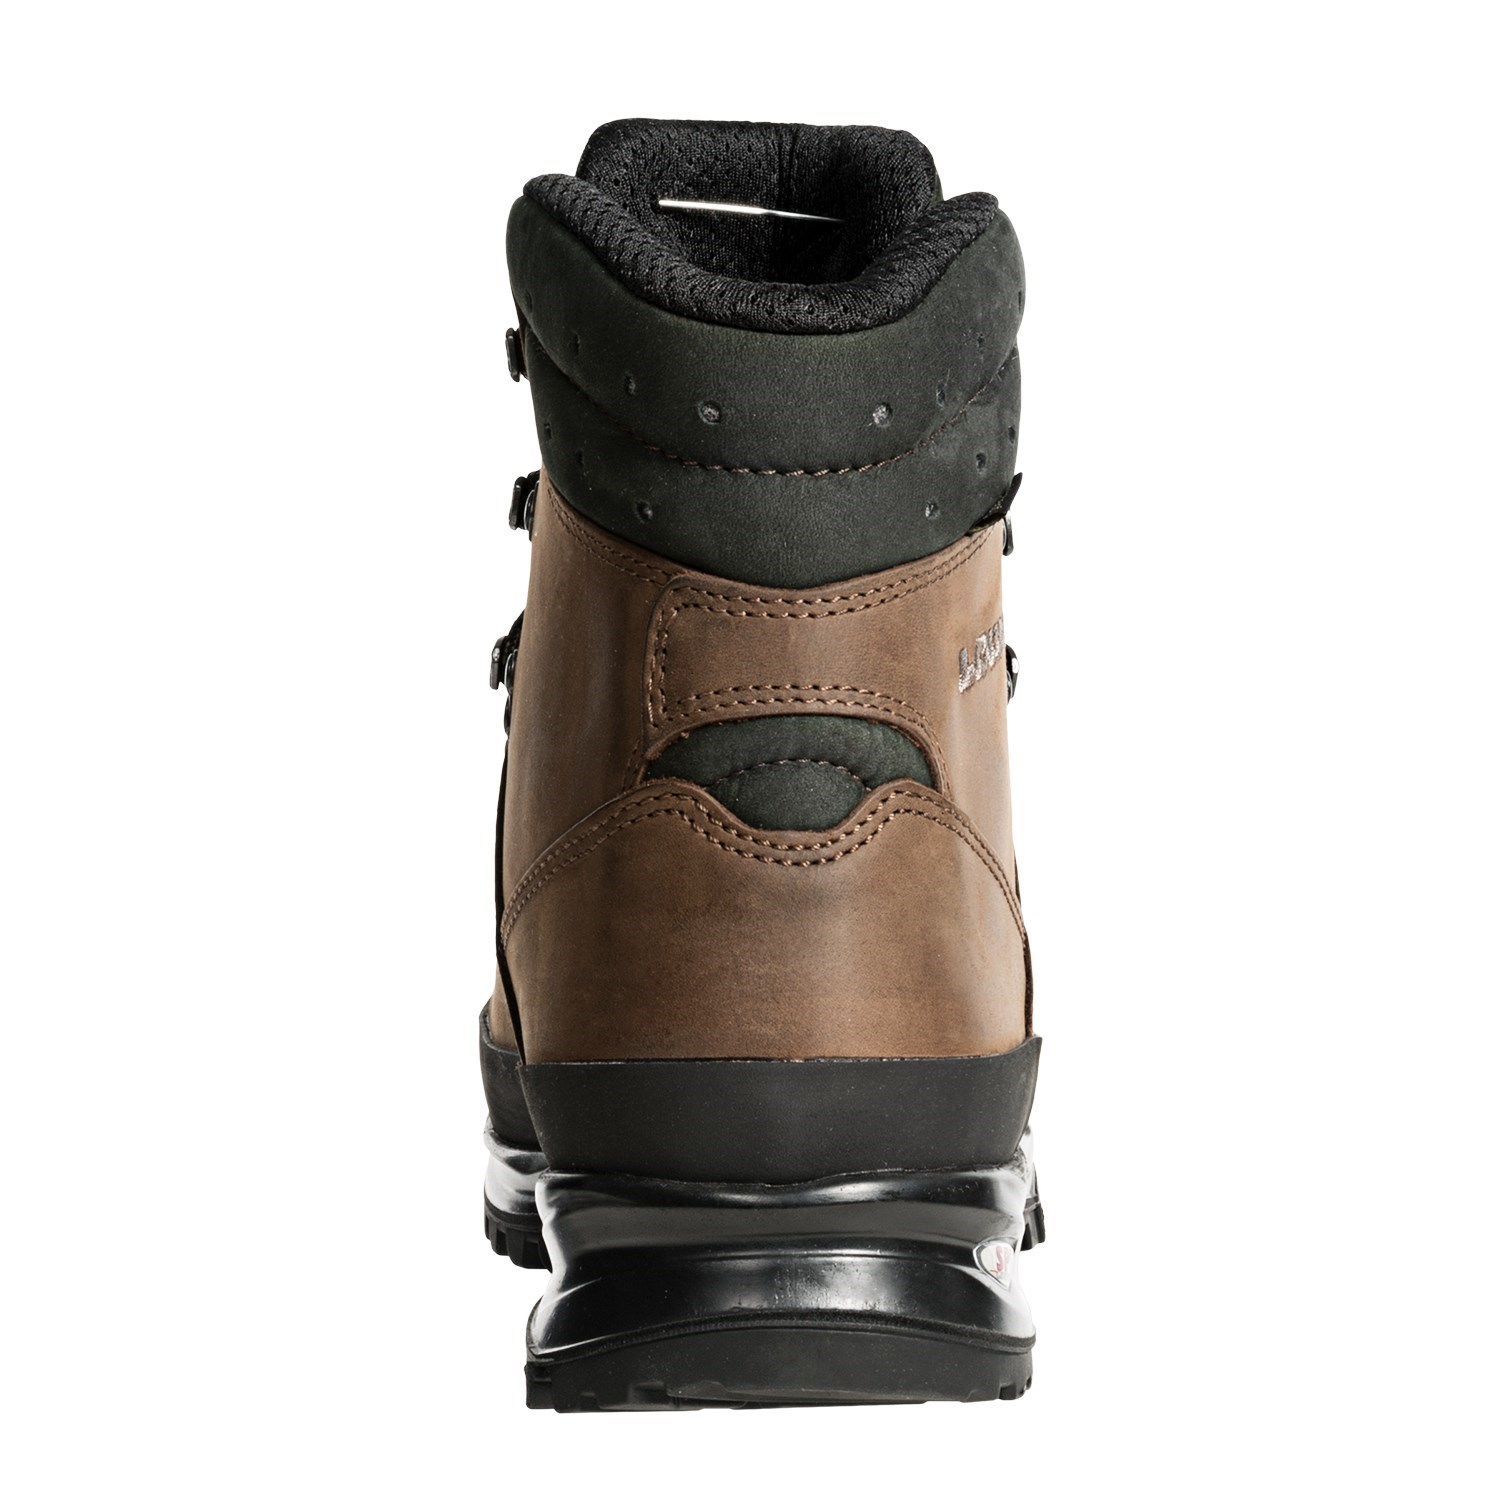 Lowa Ranger II Gore-Tex® Hunting Boots (For Men) - Save 40%